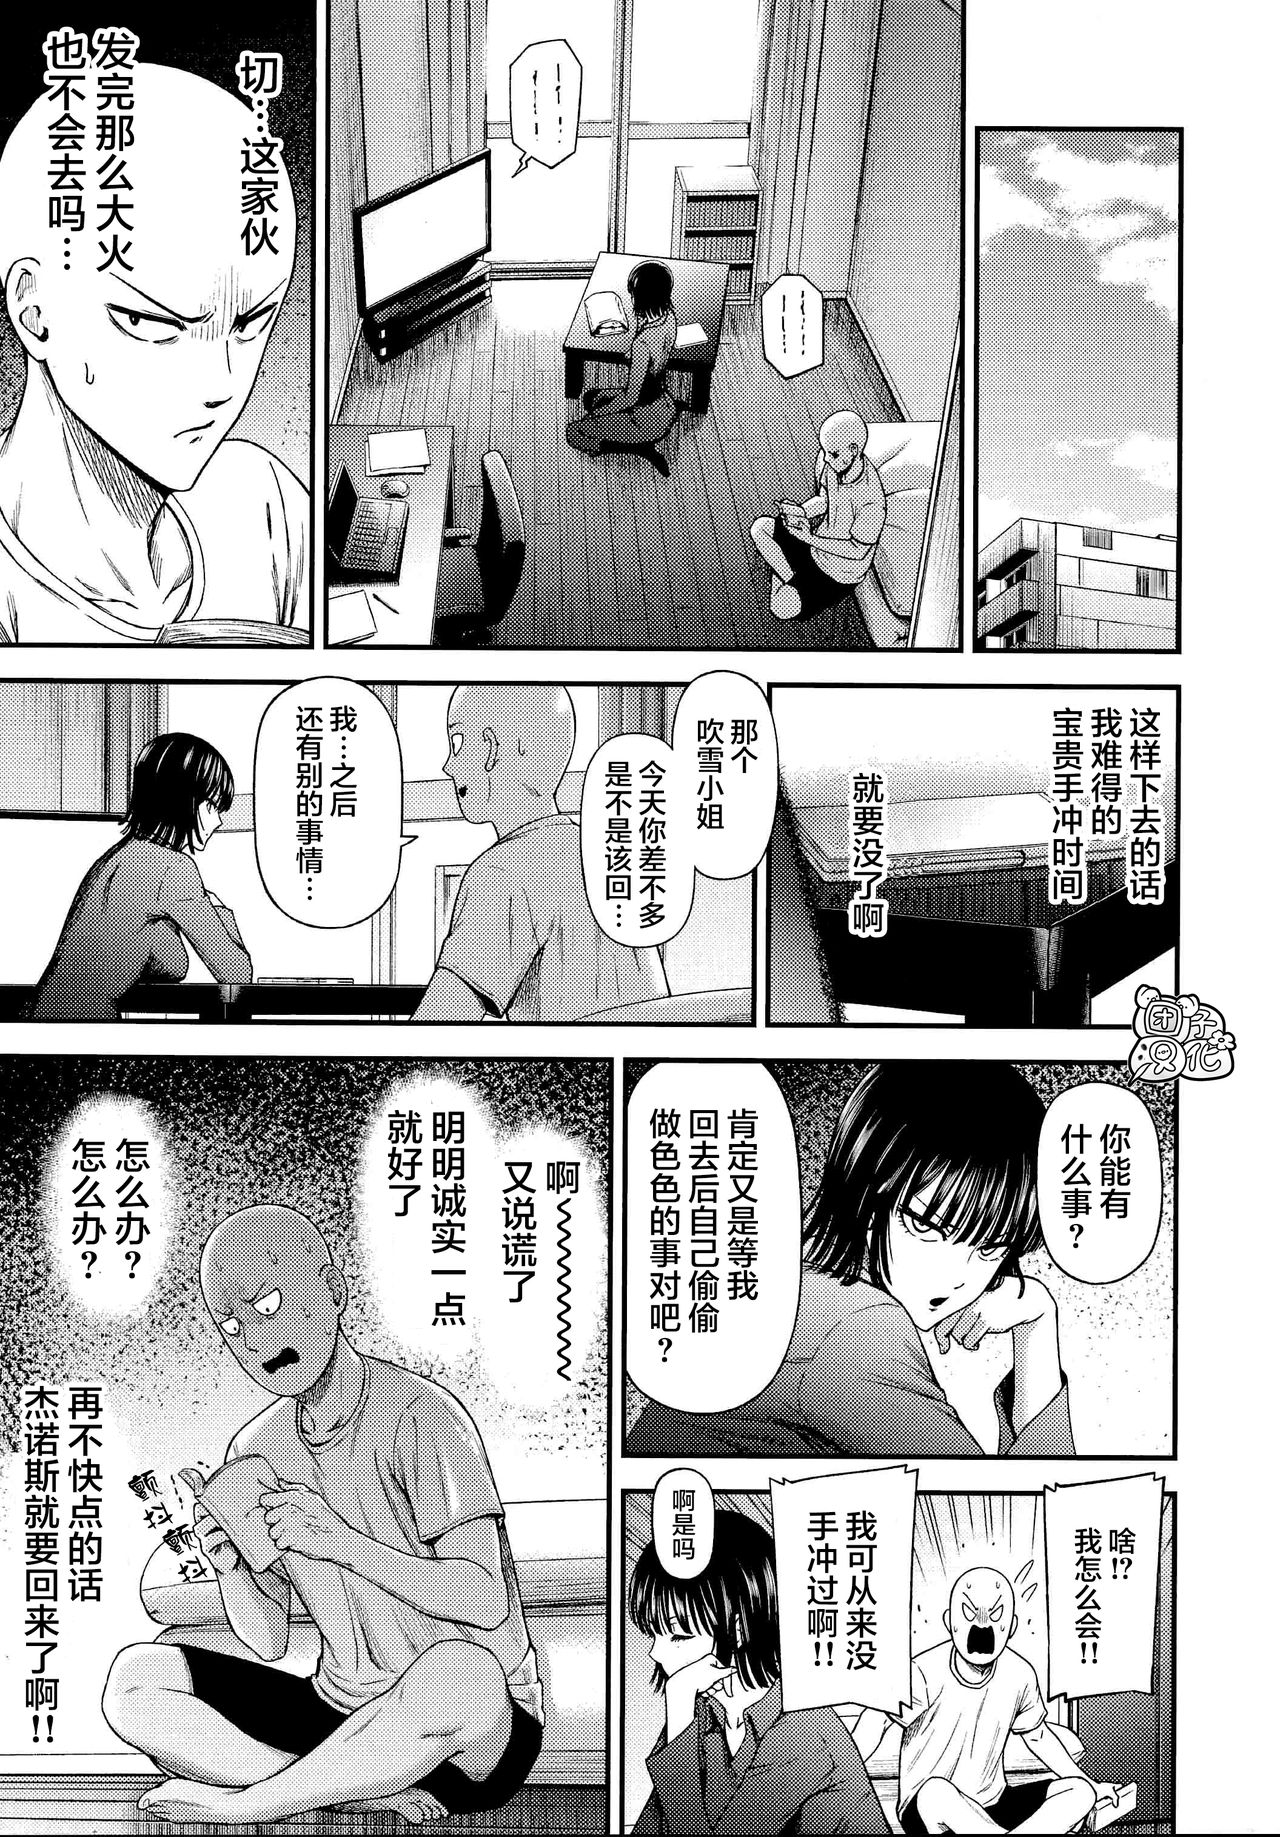 [Kiyosumi Hurricane (Kiyosumi Hurricane)] ONE-HURRICANE (One Punch Man) page 6 full